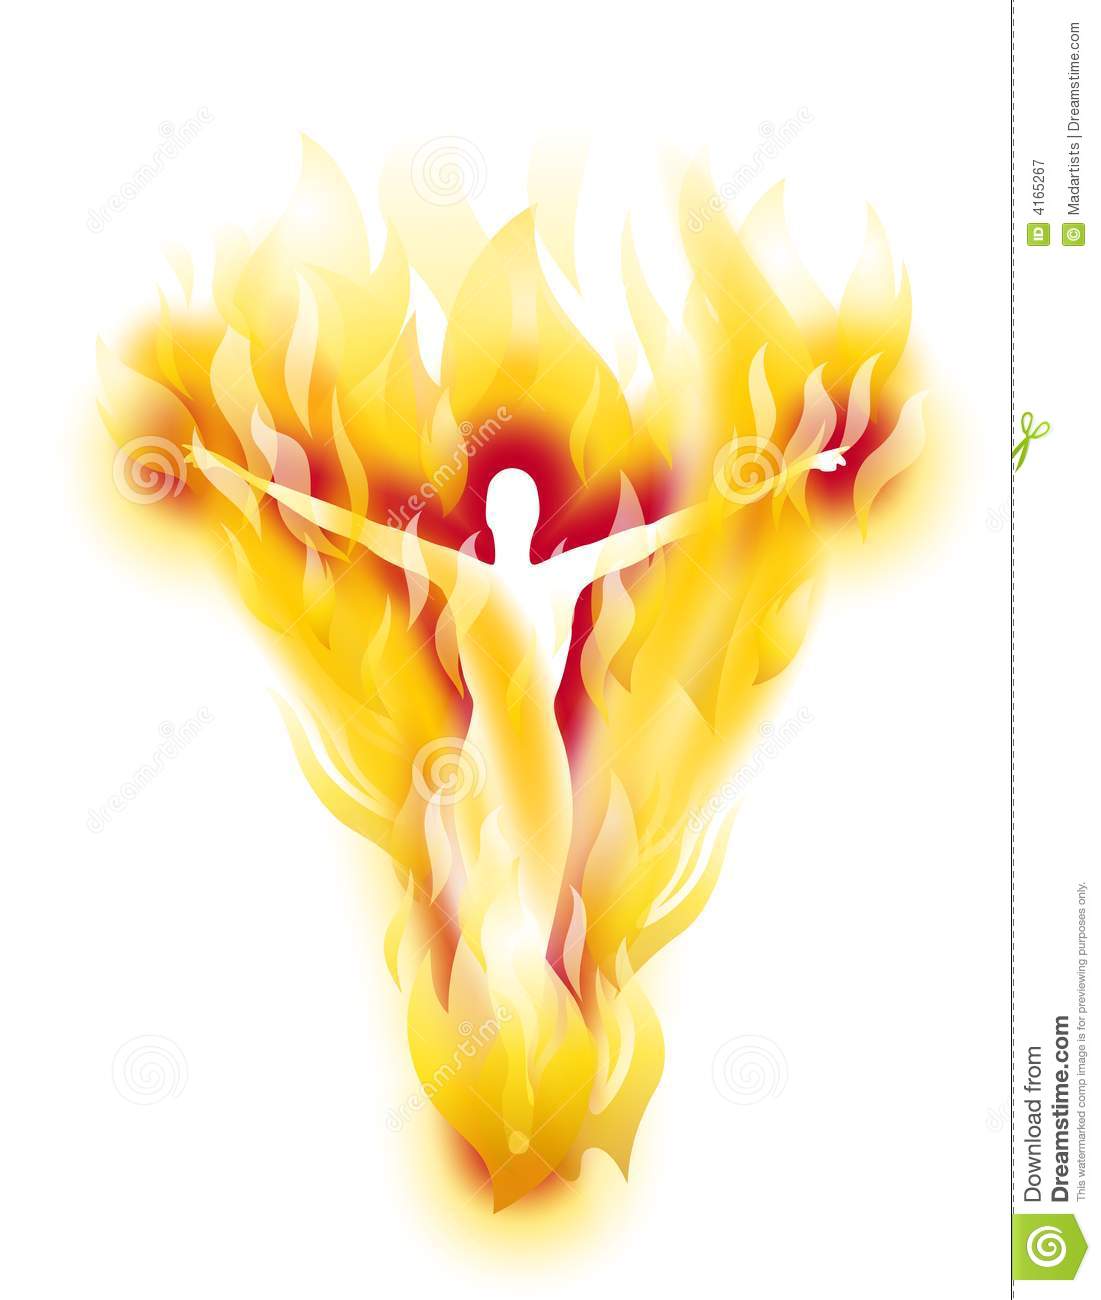 The Human Aura Fire Silhouette Royalty Free Stock Photography   Image    